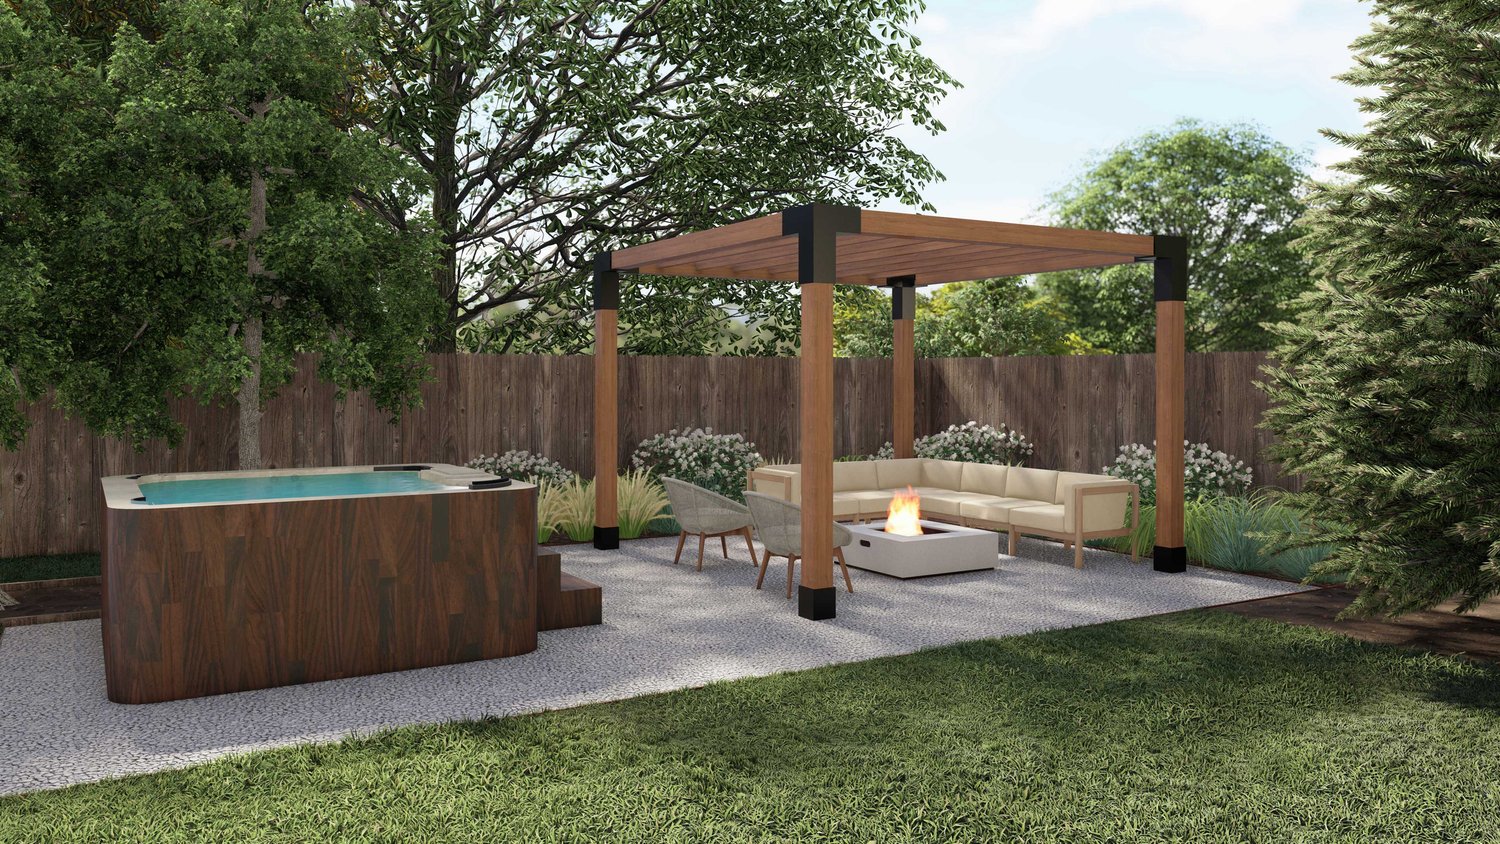 Lakewood backyard with lawn, and concrete patio with hot tub and pergola over fire pit seating area